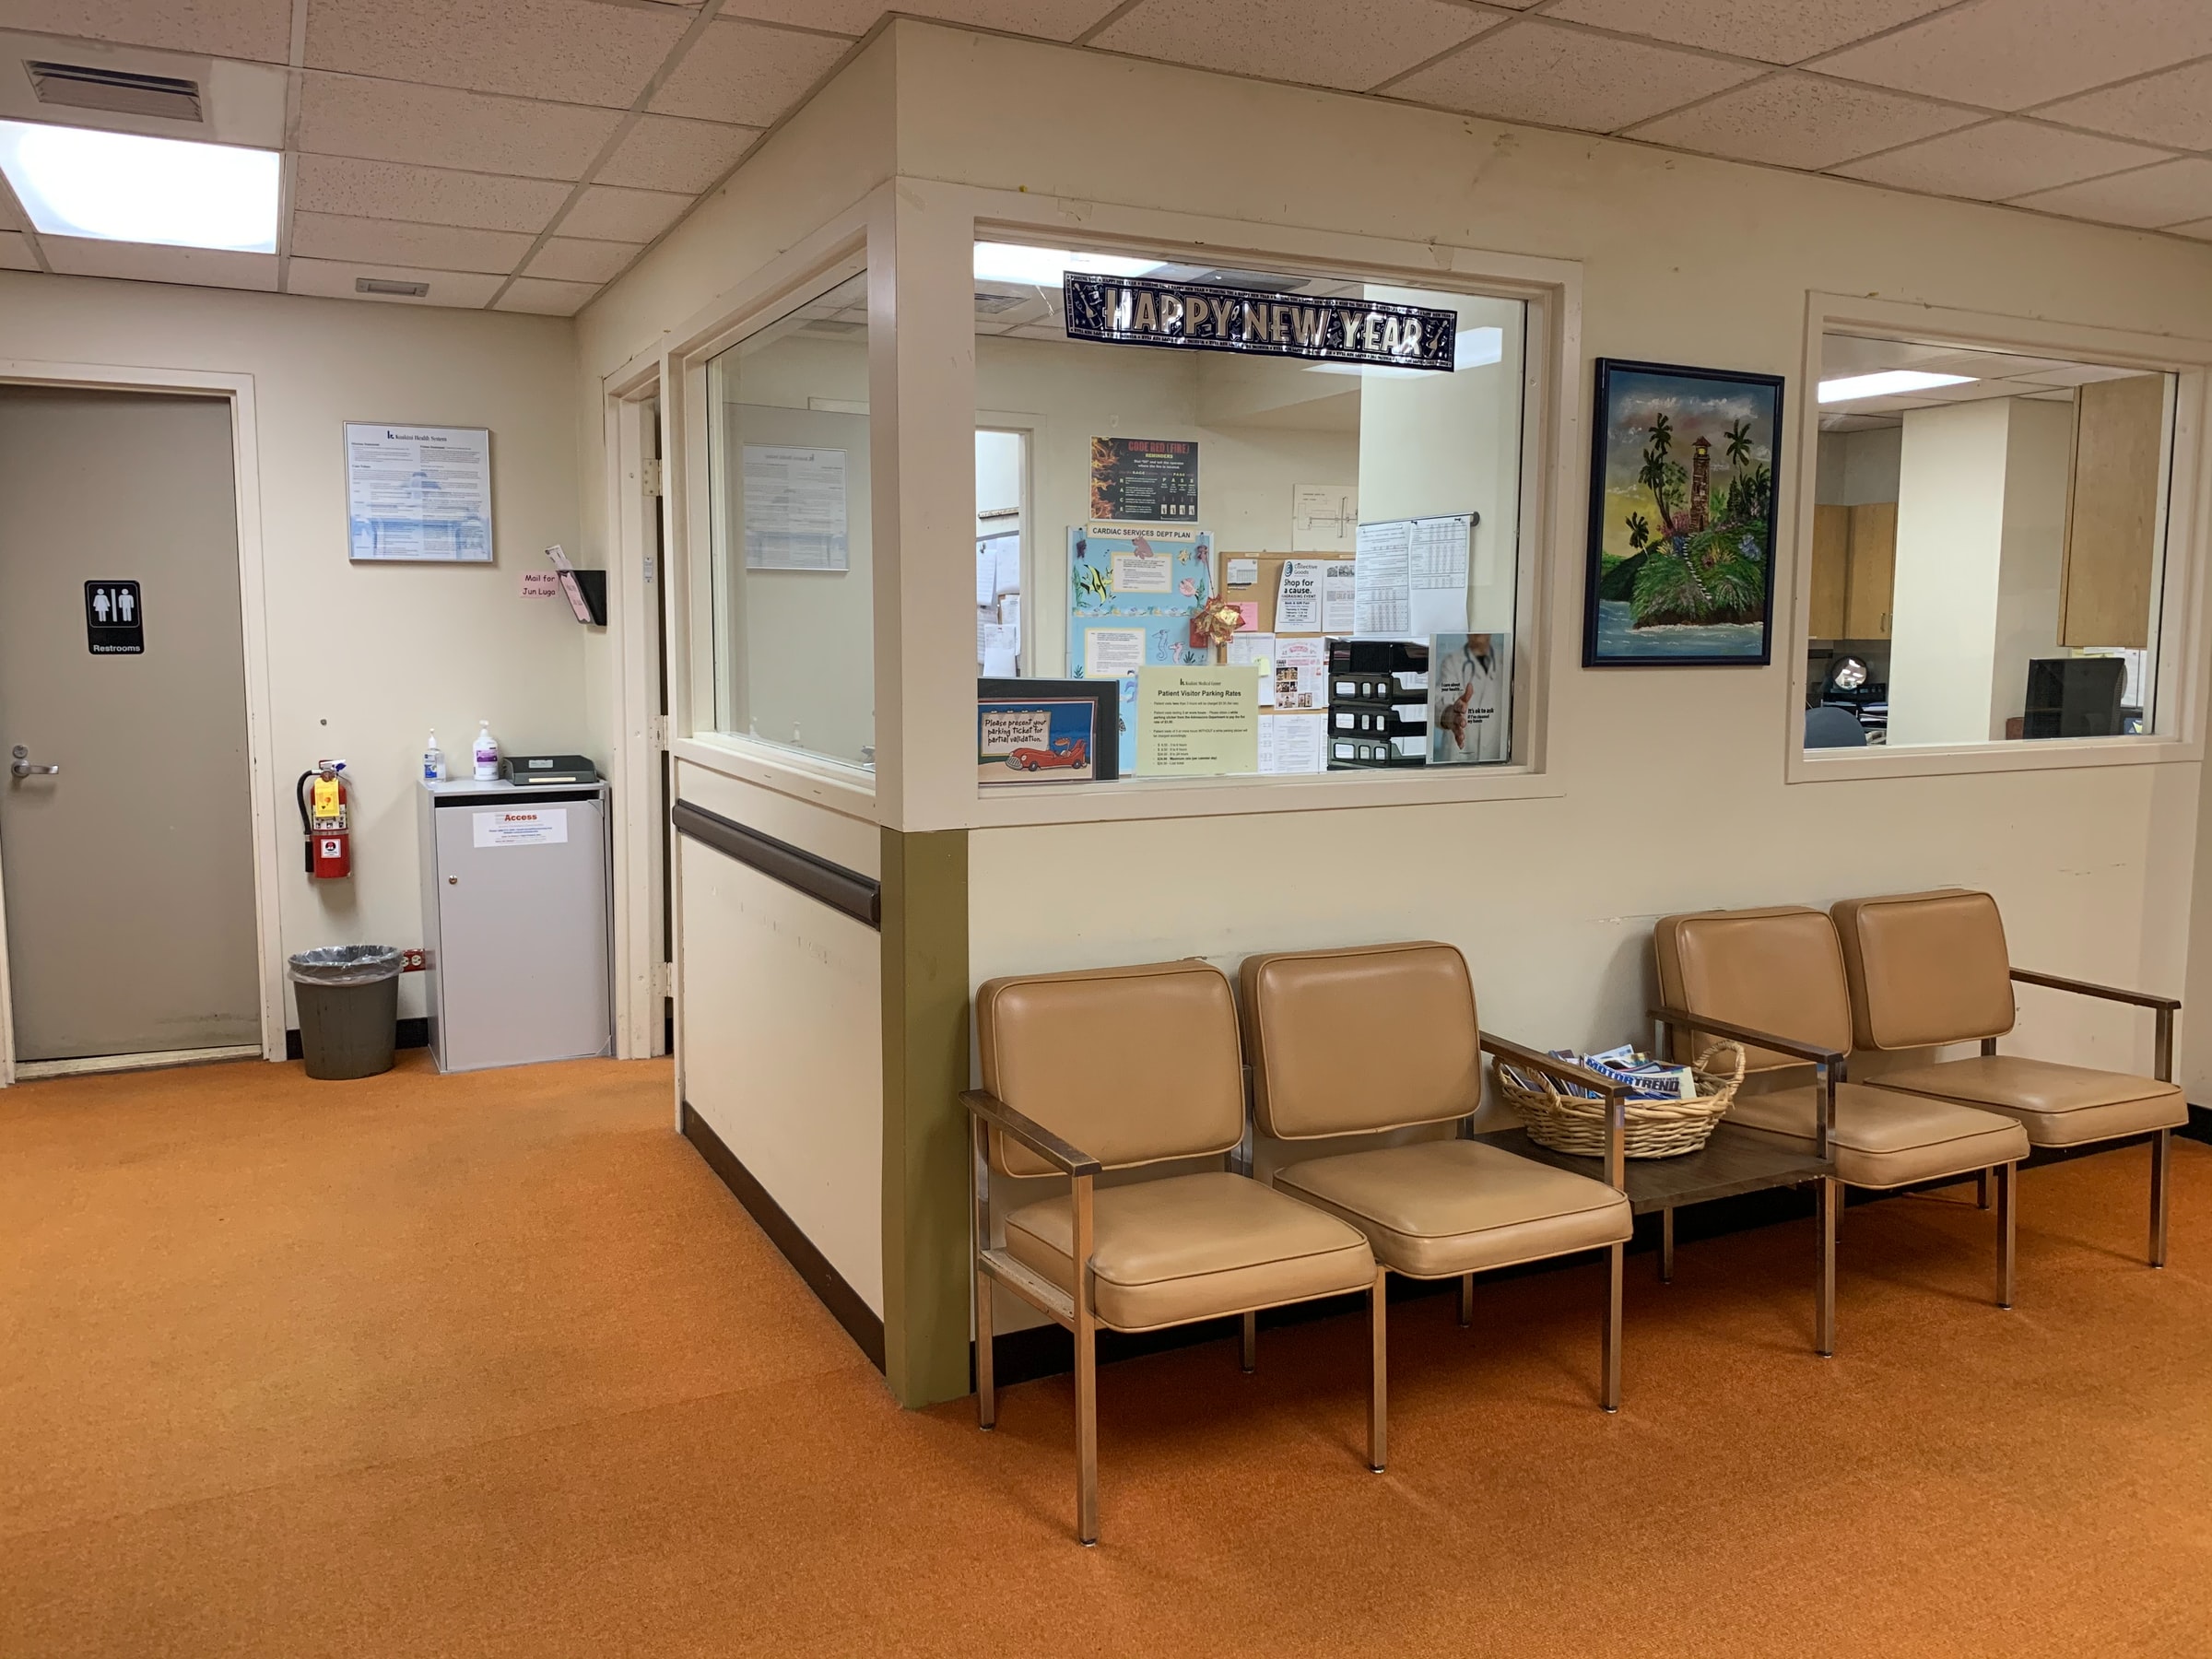 questions to ask when designing a pediatric waiting room